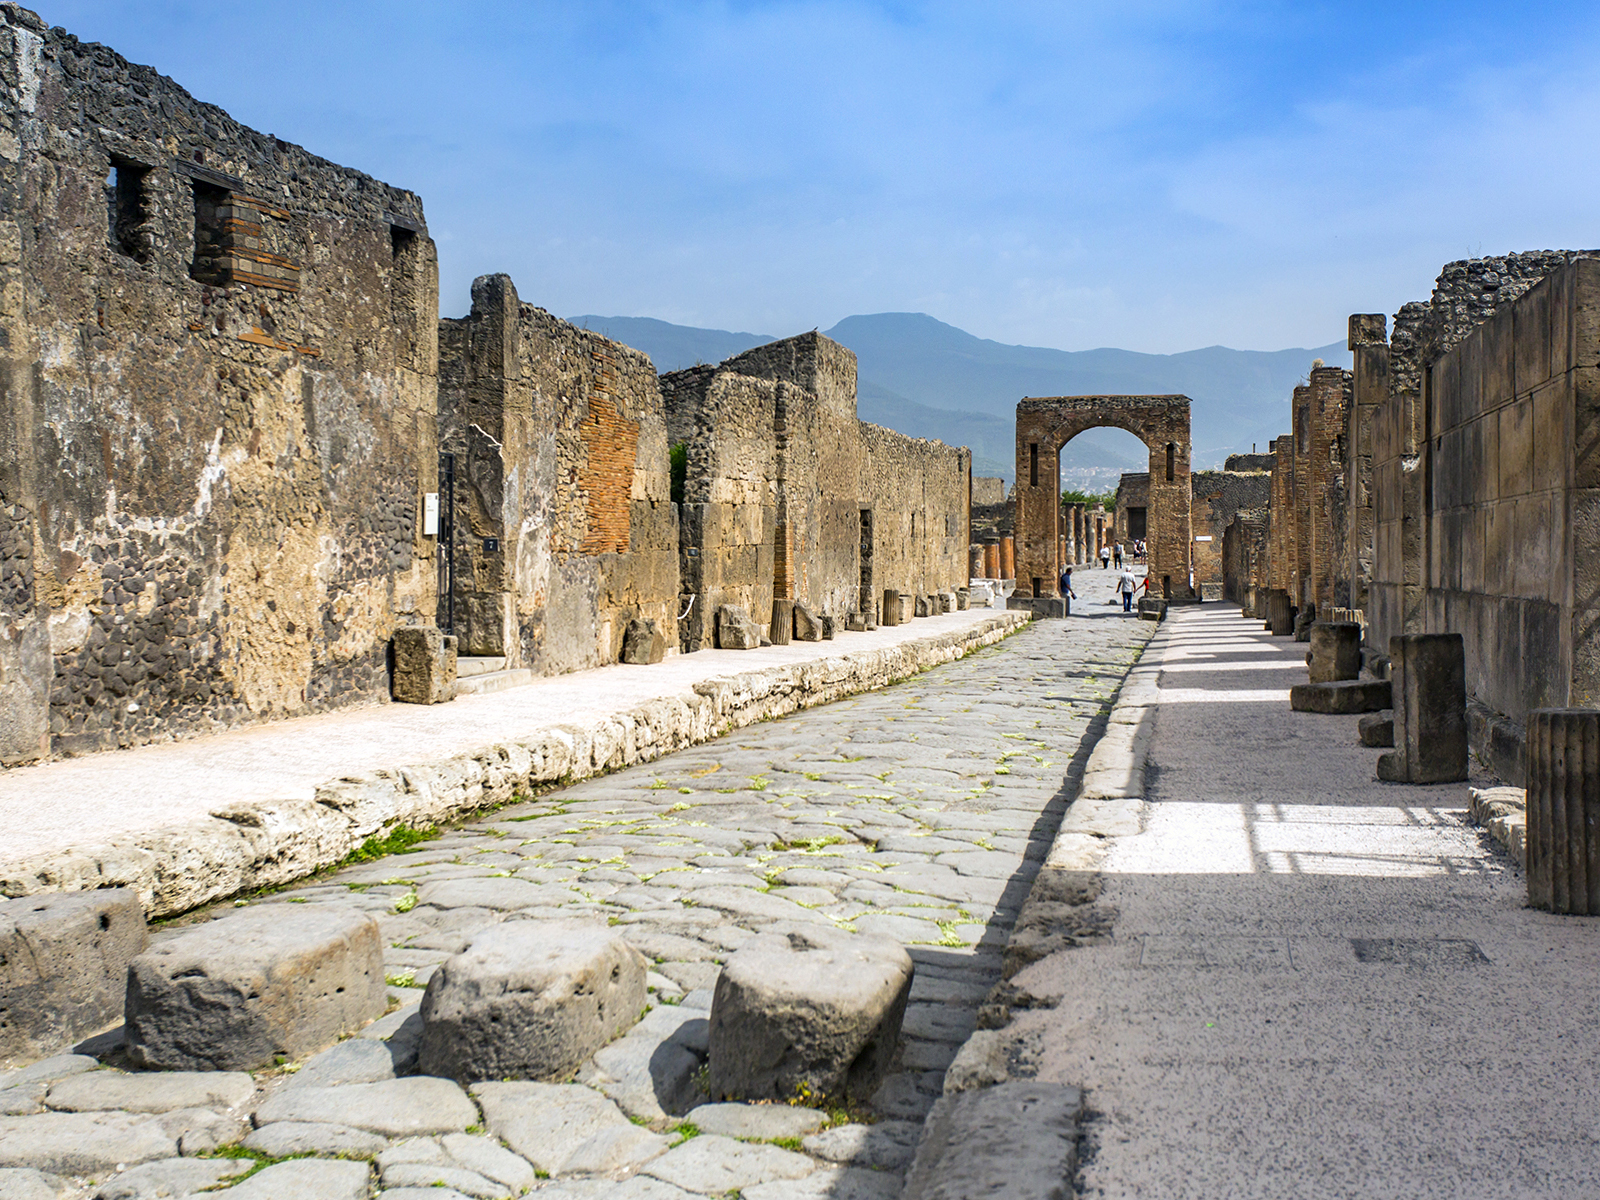 Most Popular Tourist Attractions in Italy - Dive into History at Pompeii